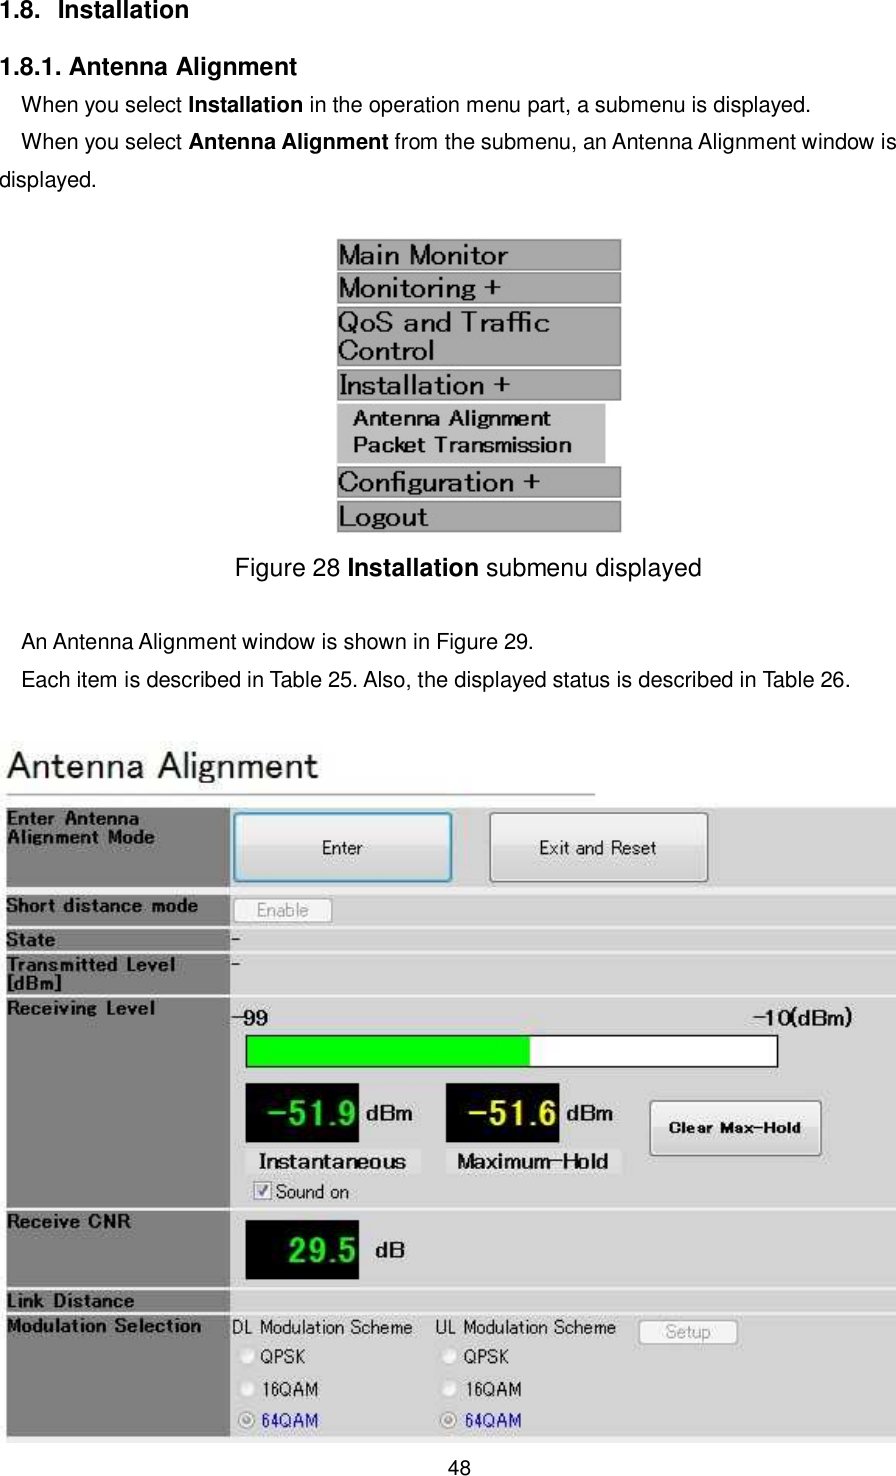    48  1.8.  Installation 1.8.1. Antenna Alignment When you select Installation in the operation menu part, a submenu is displayed. When you select Antenna Alignment from the submenu, an Antenna Alignment window is displayed.   Figure 28 Installation submenu displayed  An Antenna Alignment window is shown in Figure 29. Each item is described in Table 25. Also, the displayed status is described in Table 26.  